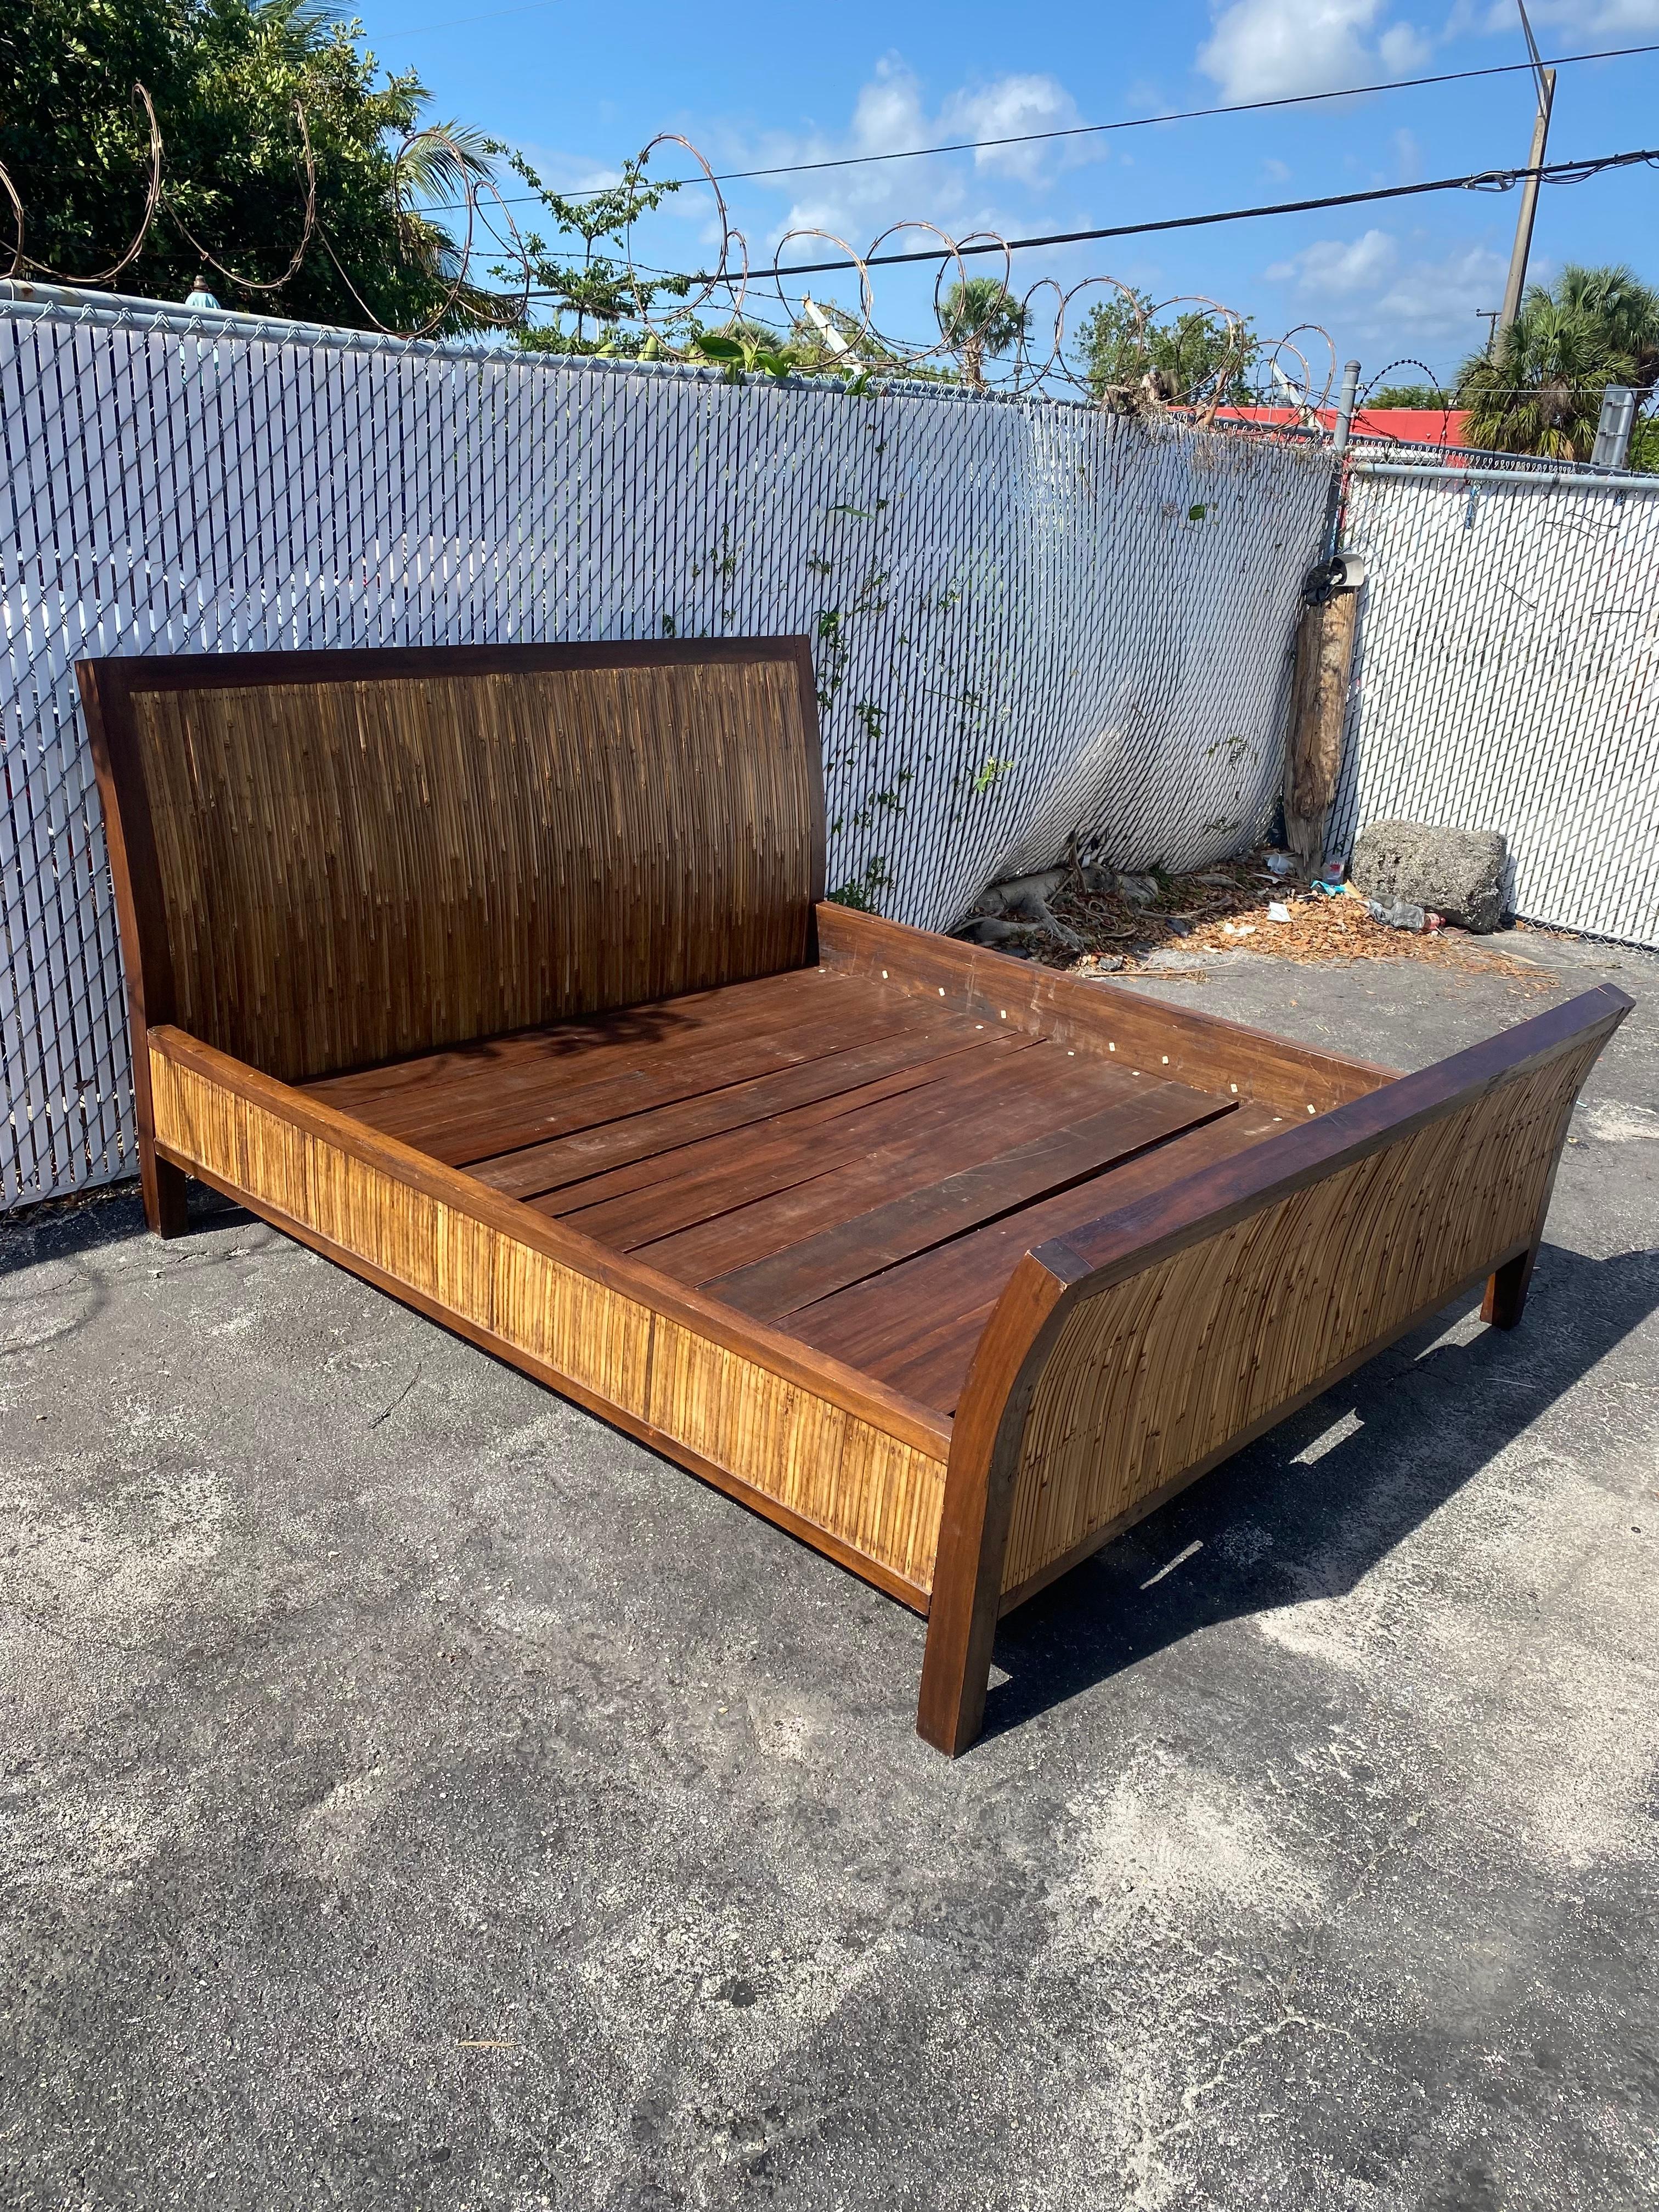 On offer on this occasion is one of the most stunning and rare, hand cut, double rattan sticks inlaid wood king bed you could hope to find. Outstanding design is exhibited throughout. The beautiful monumental bed is statement piece and packed with